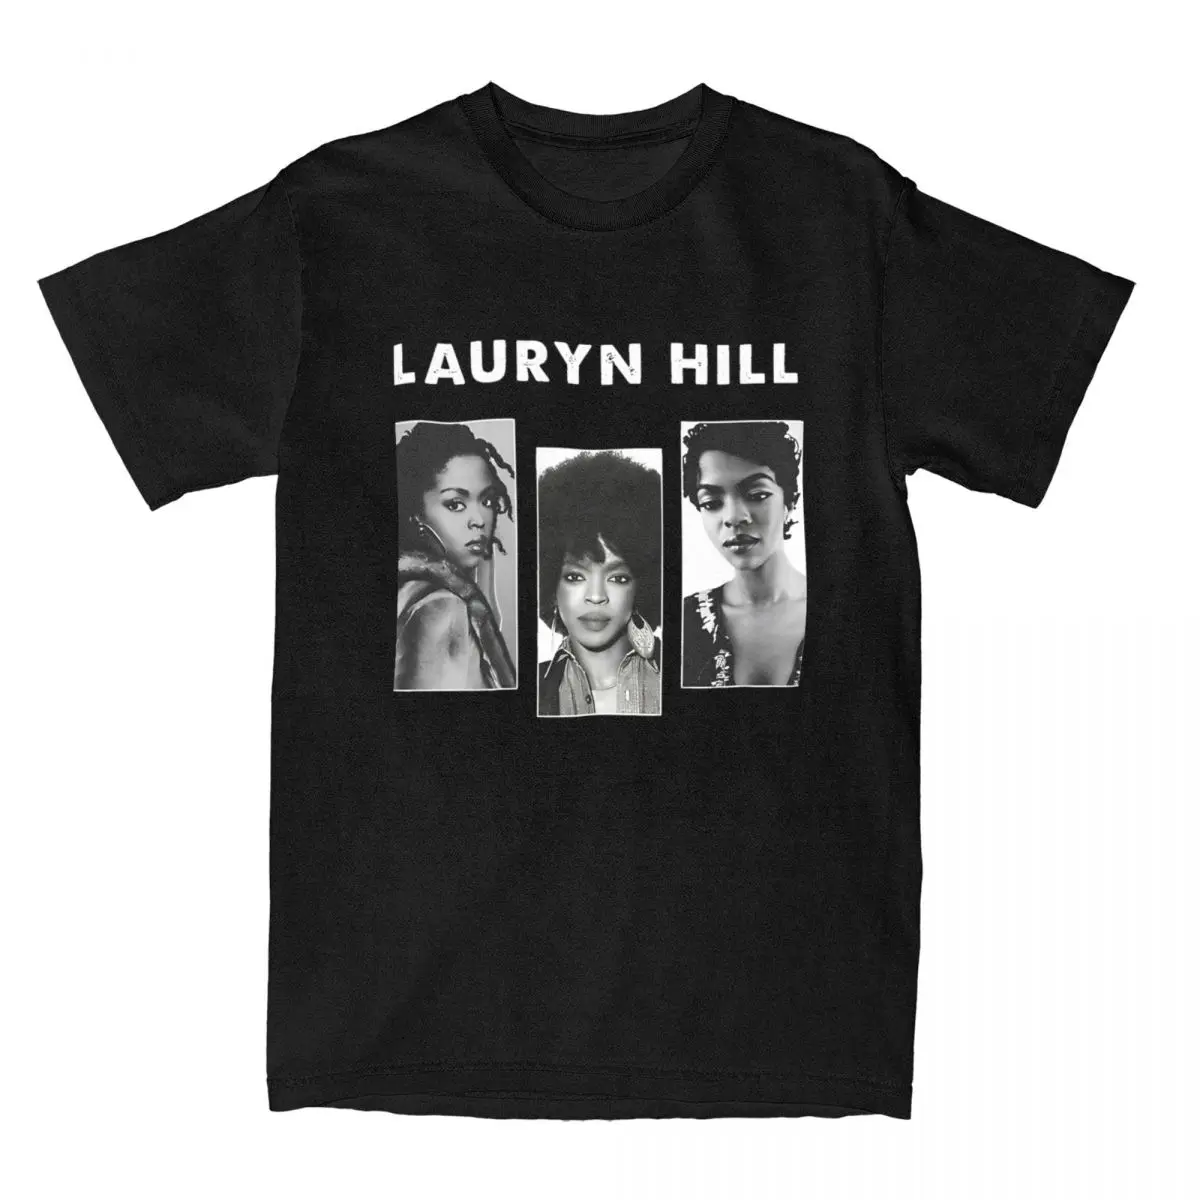 

Music Vintage Lauryn Hill Fugees T Shirt Accessories Men Women 100% Cotton Humorous Tee Shirt Short Sleeve Tops Christmas Gifts